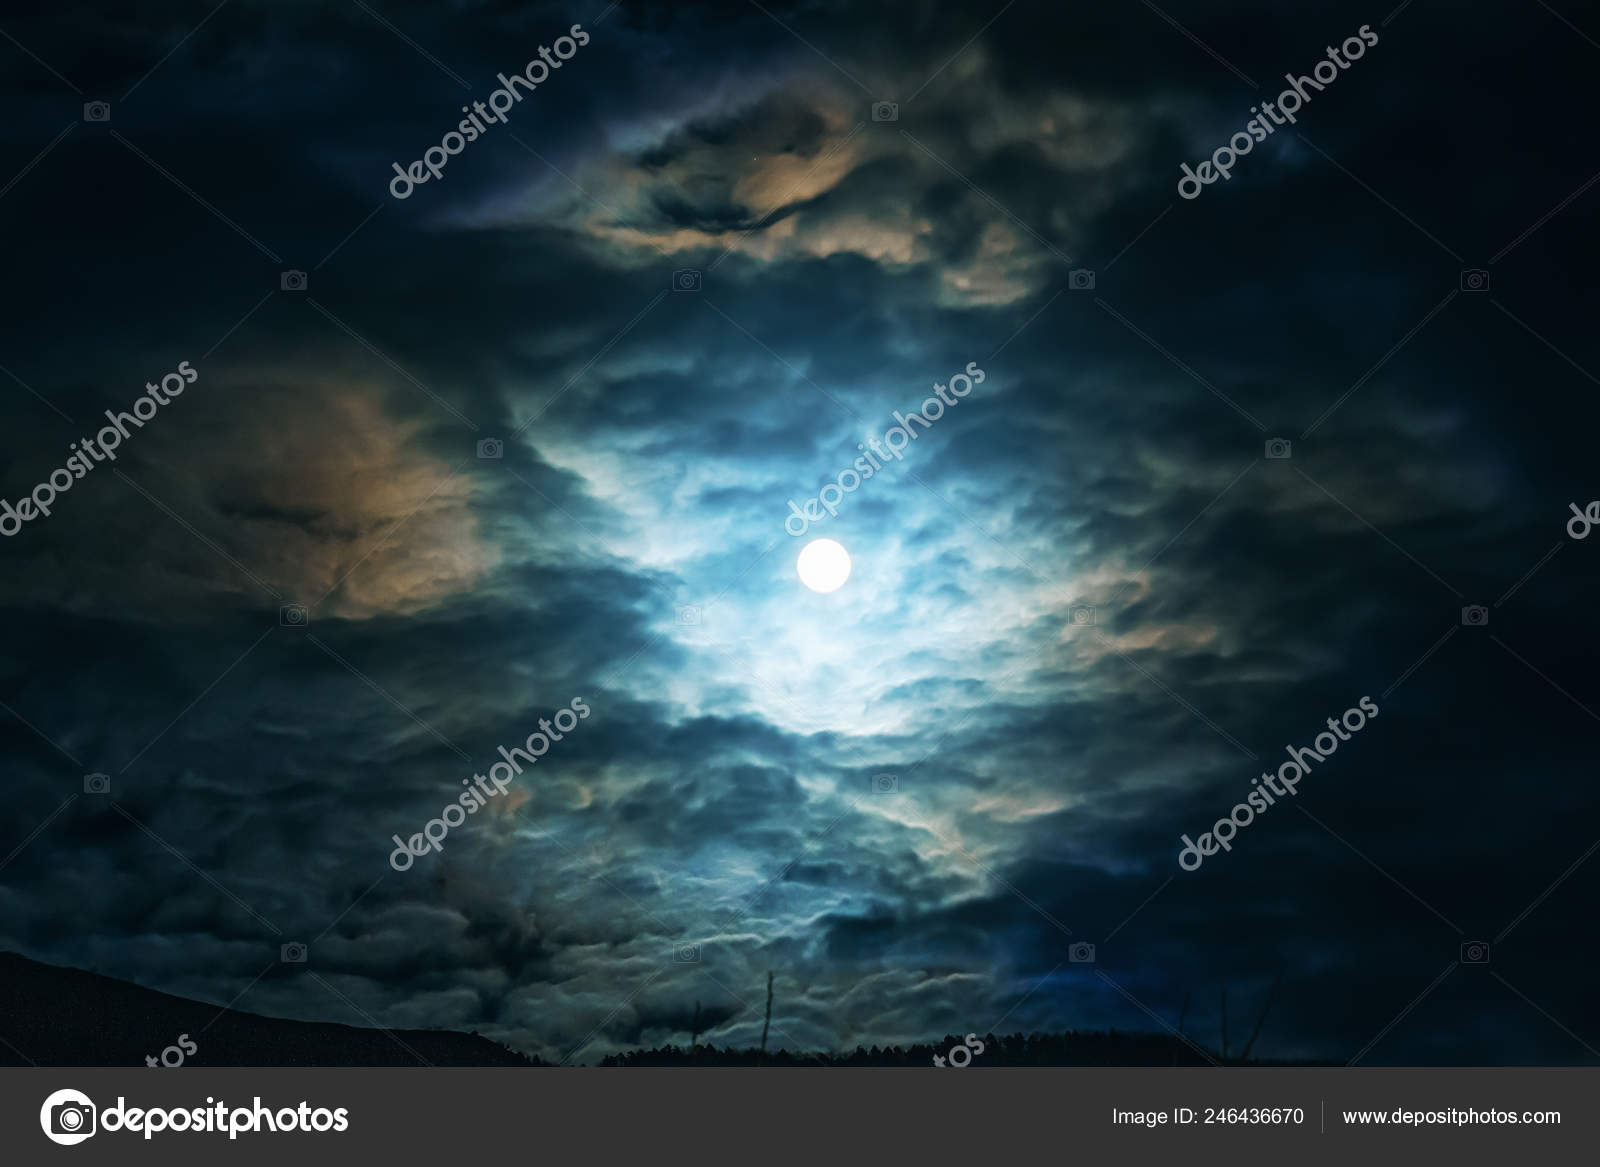 Full Moon Or Supermoon In Night Blue Sky With Clouds Dramatic Mysterious Atmosphere Stock Photo Image By C Dedmityay